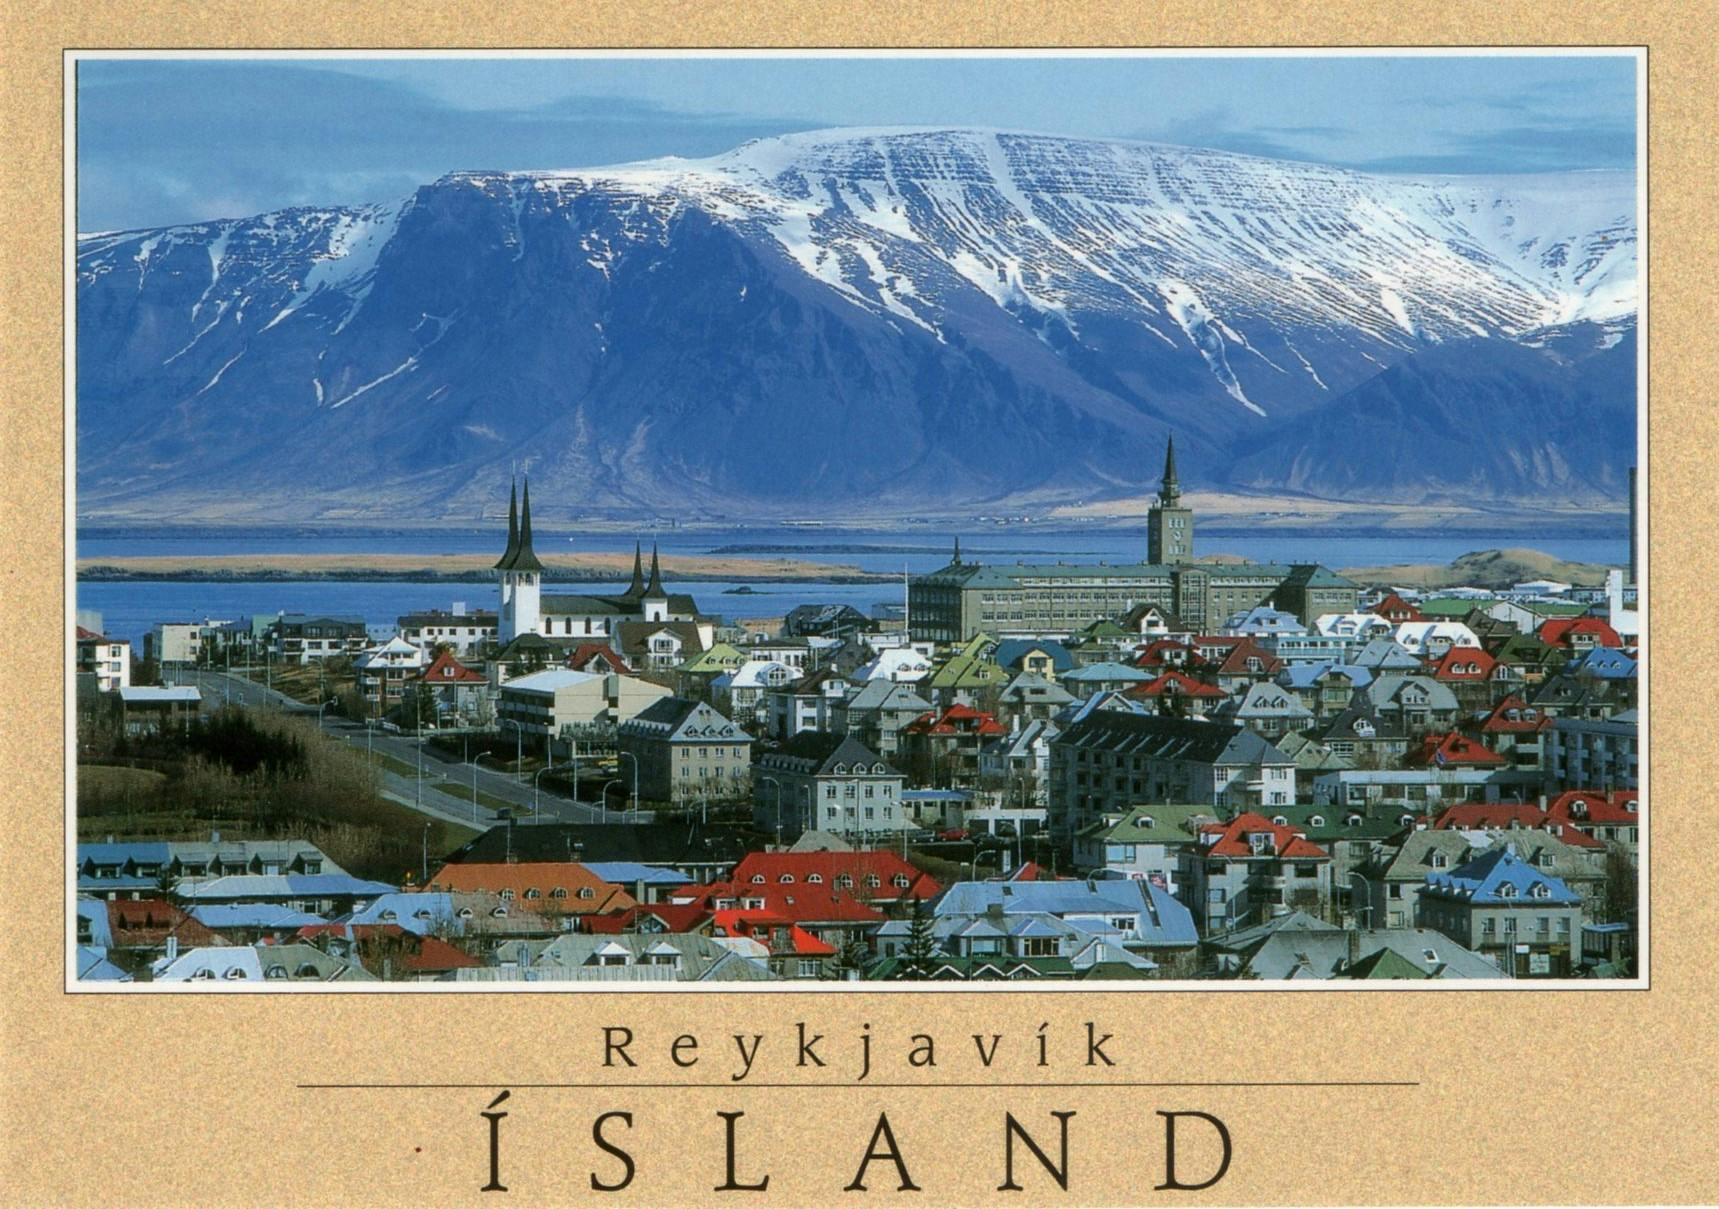 Iceland card front 0